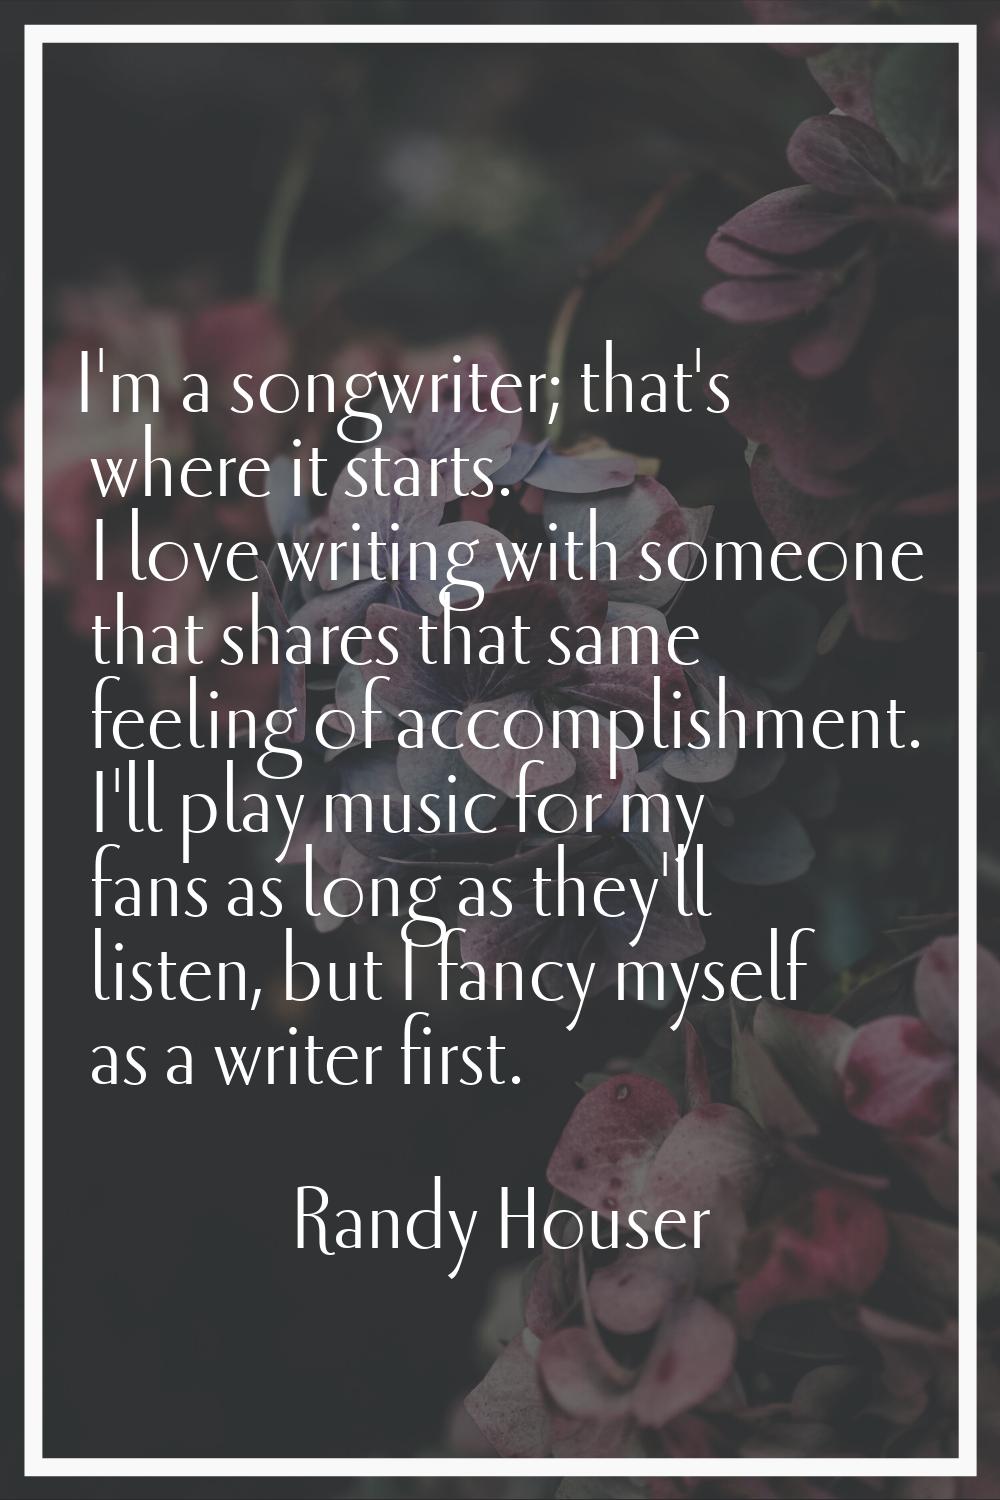 I'm a songwriter; that's where it starts. I love writing with someone that shares that same feeling